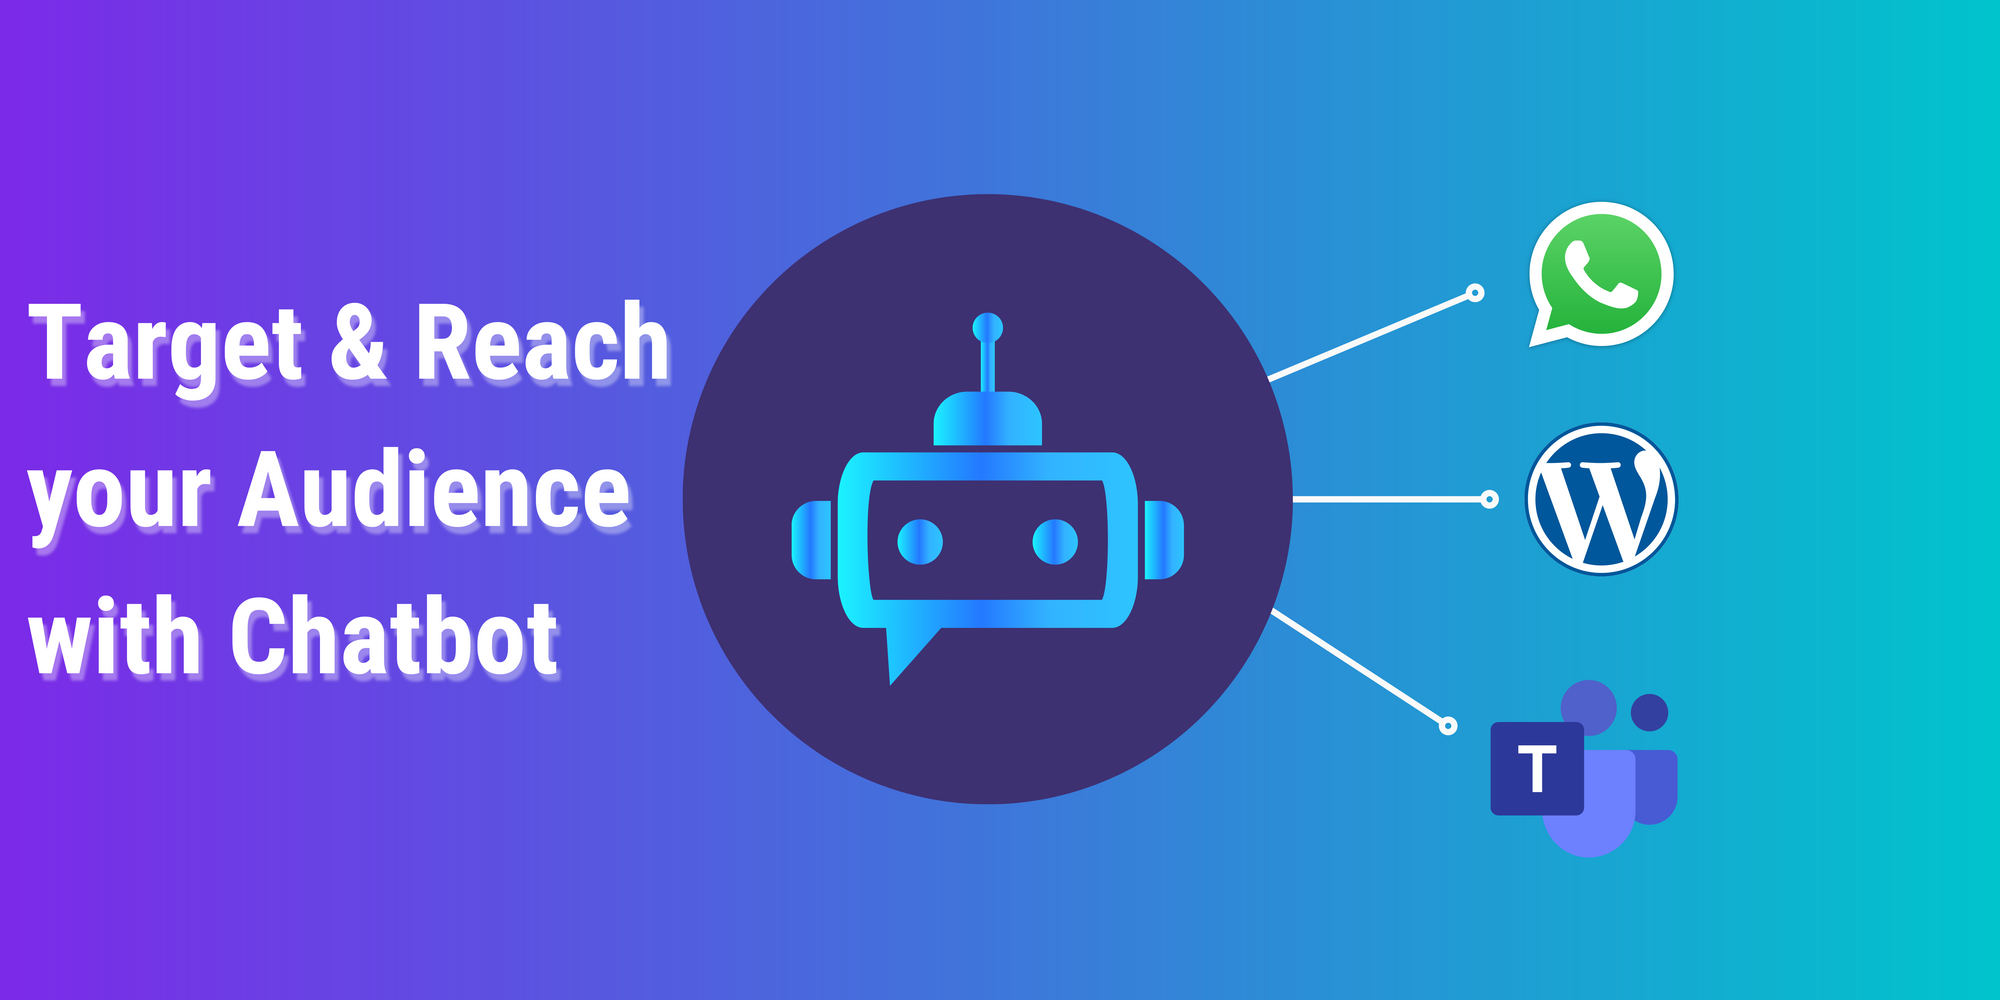 WhatsApp, Messenger Chatbot… Where to reach my audience?